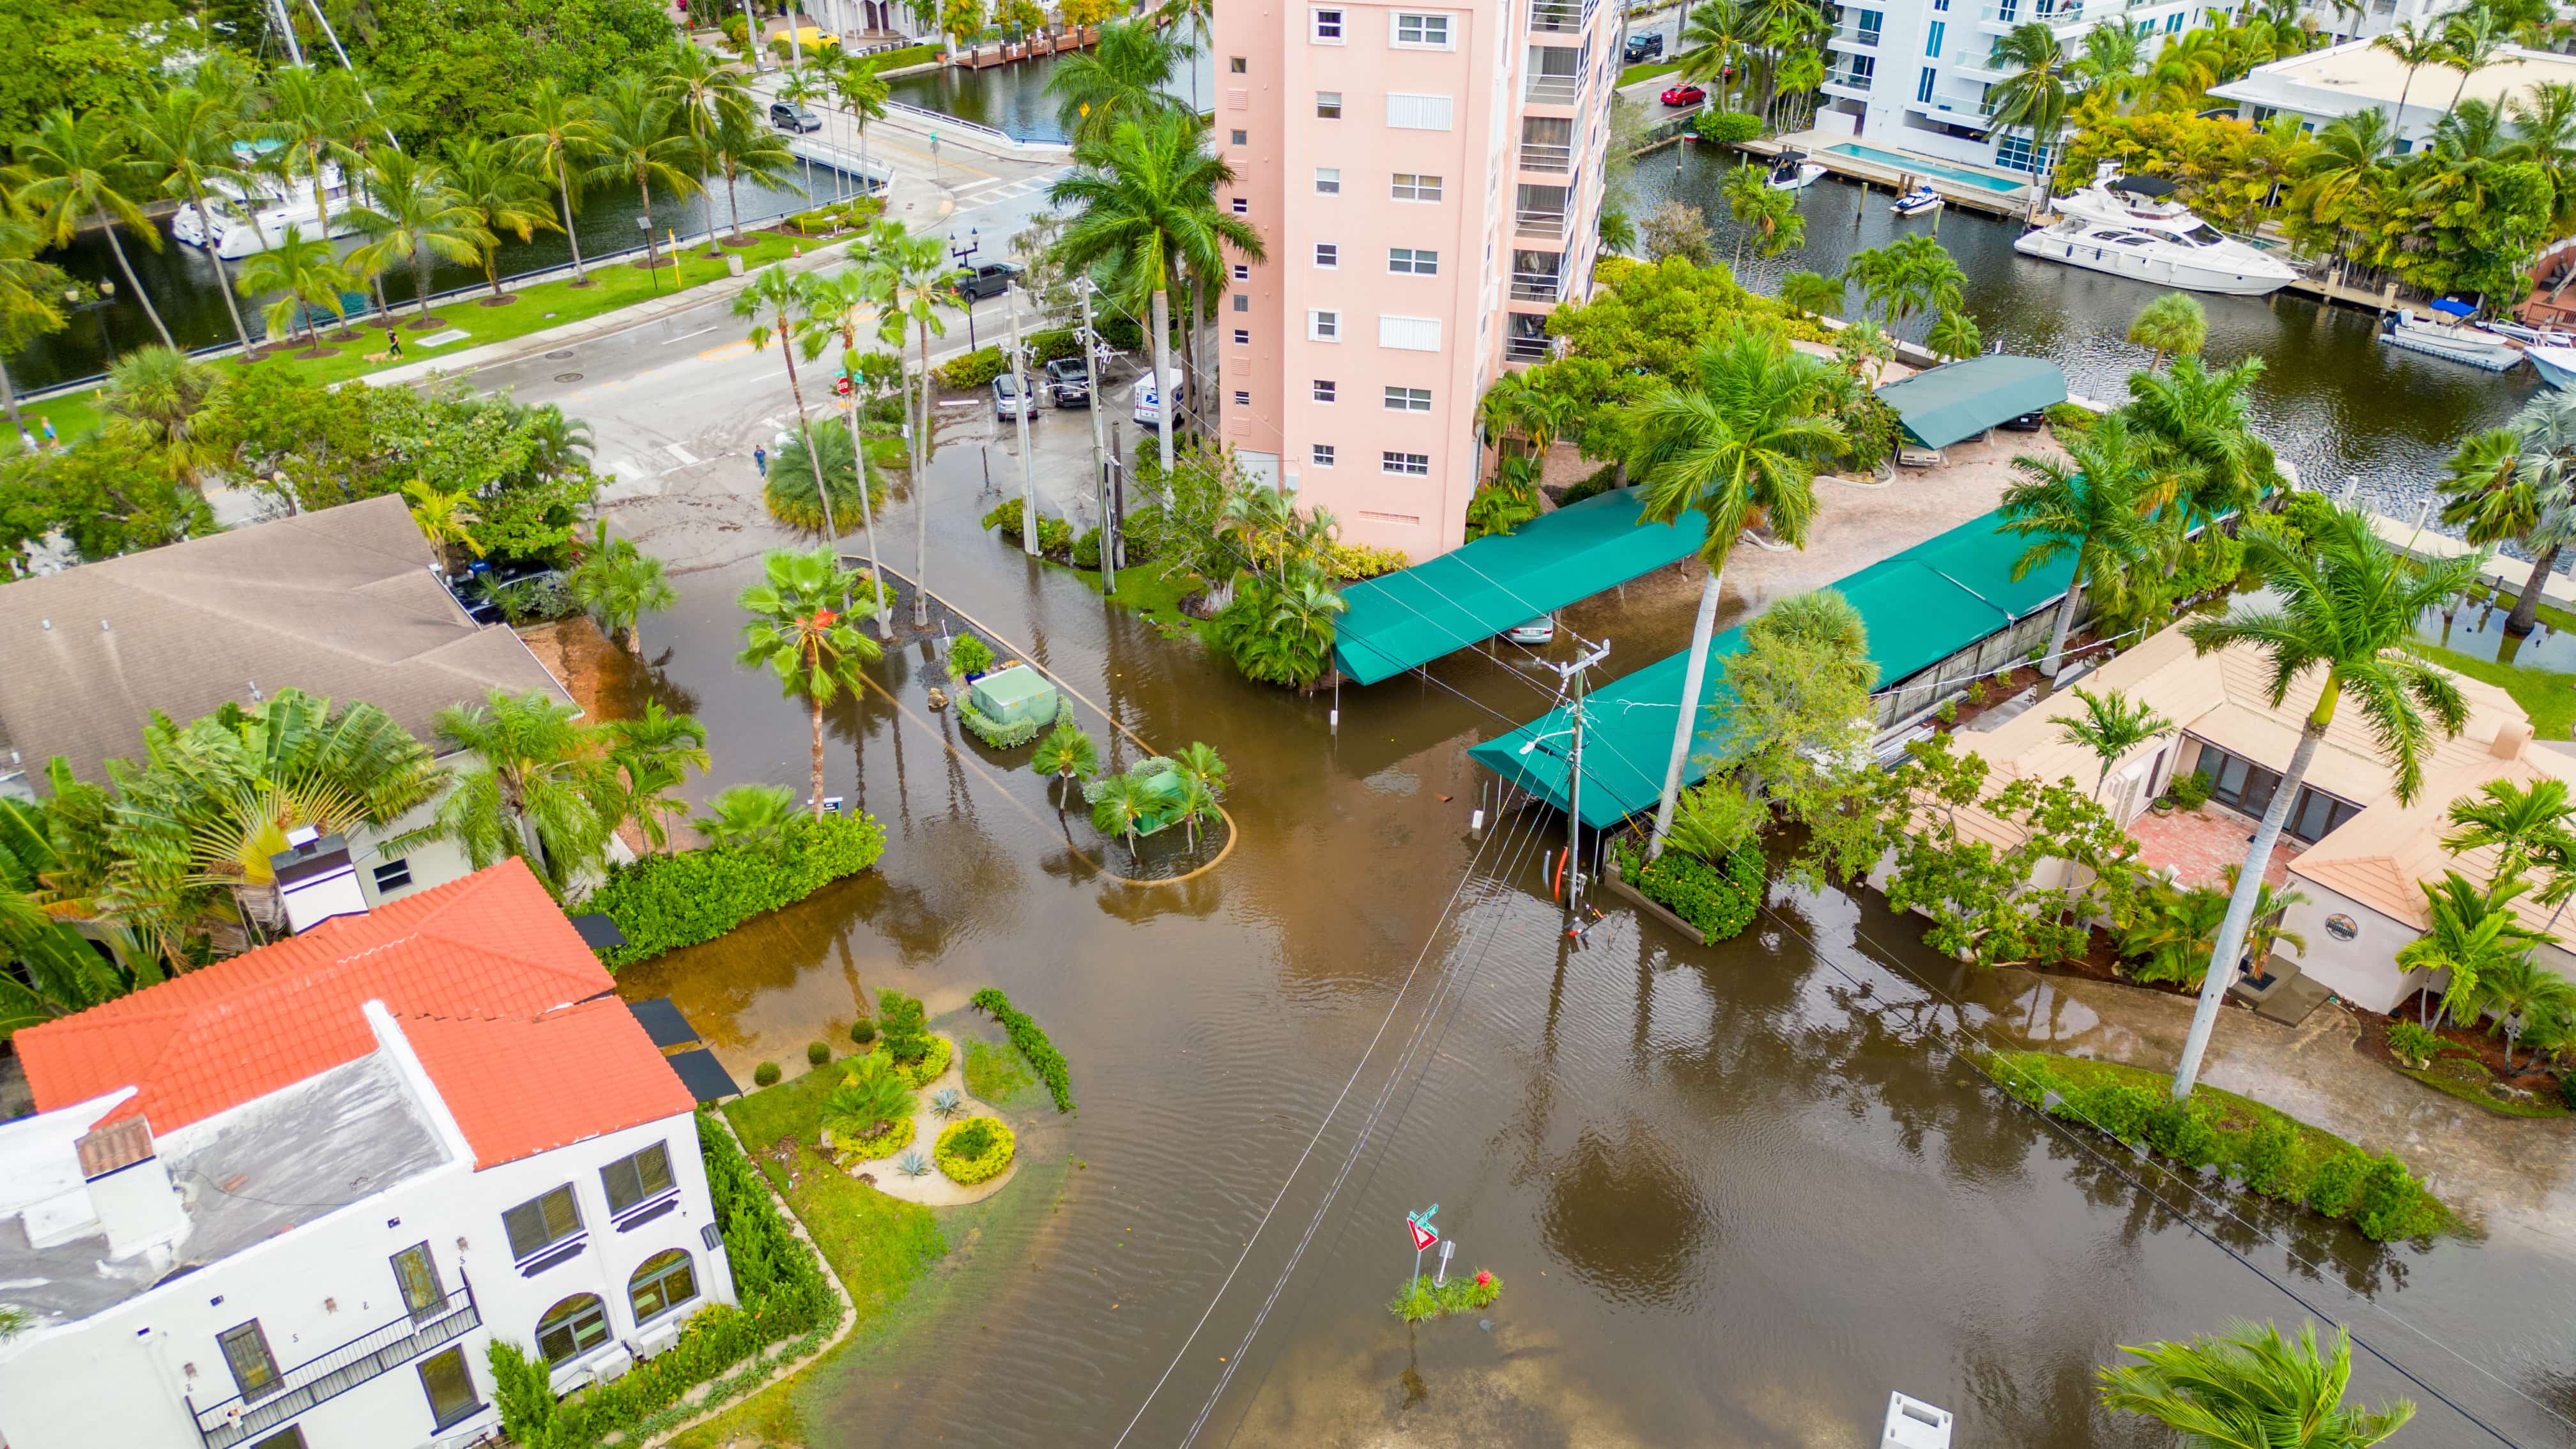 Historic flooding in South Florida, AccuWeather gives businesses